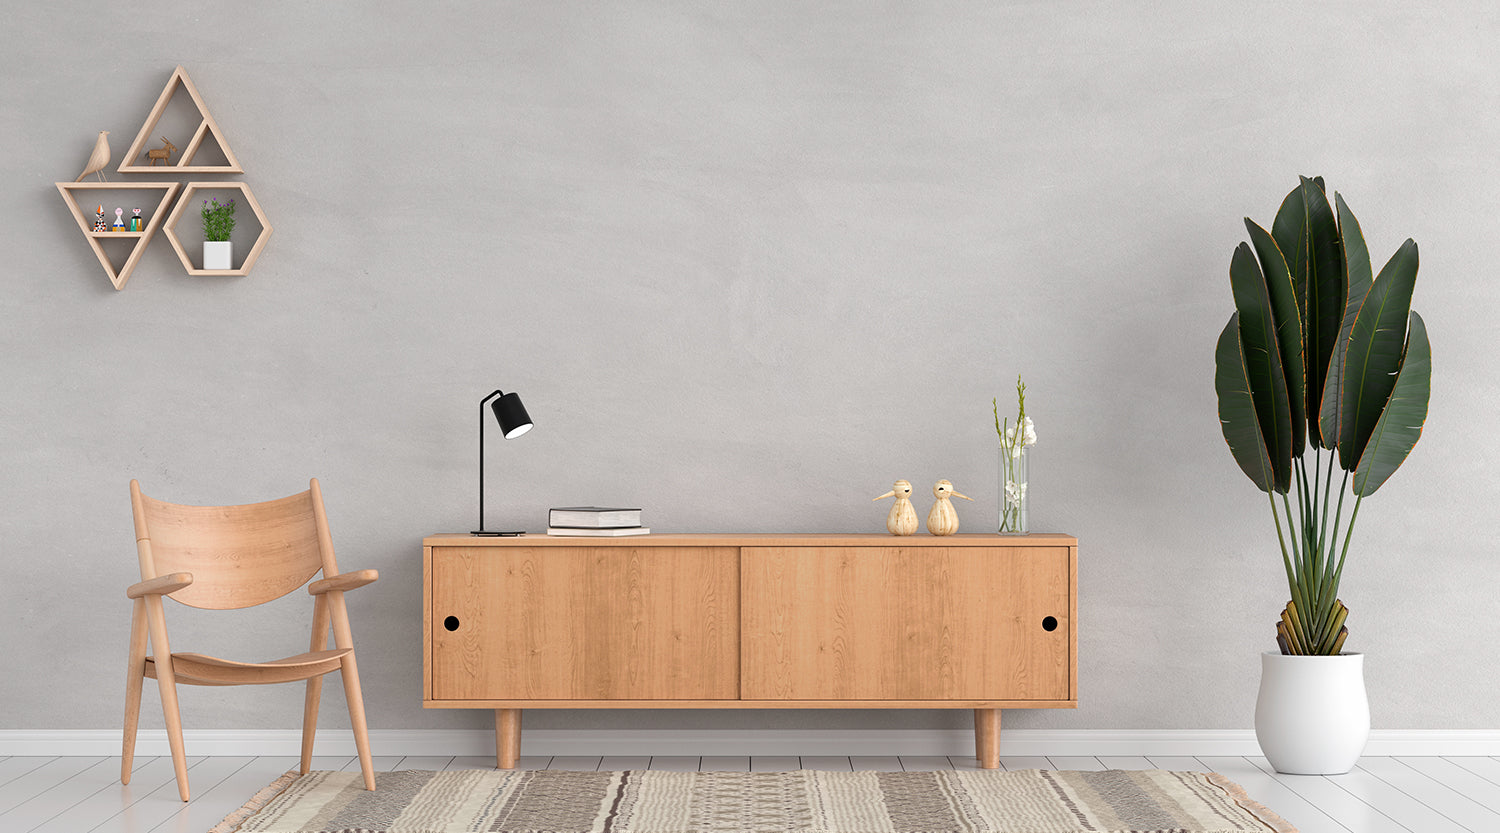 Find These Sideboard Ideas for Stylish and Practical Options!